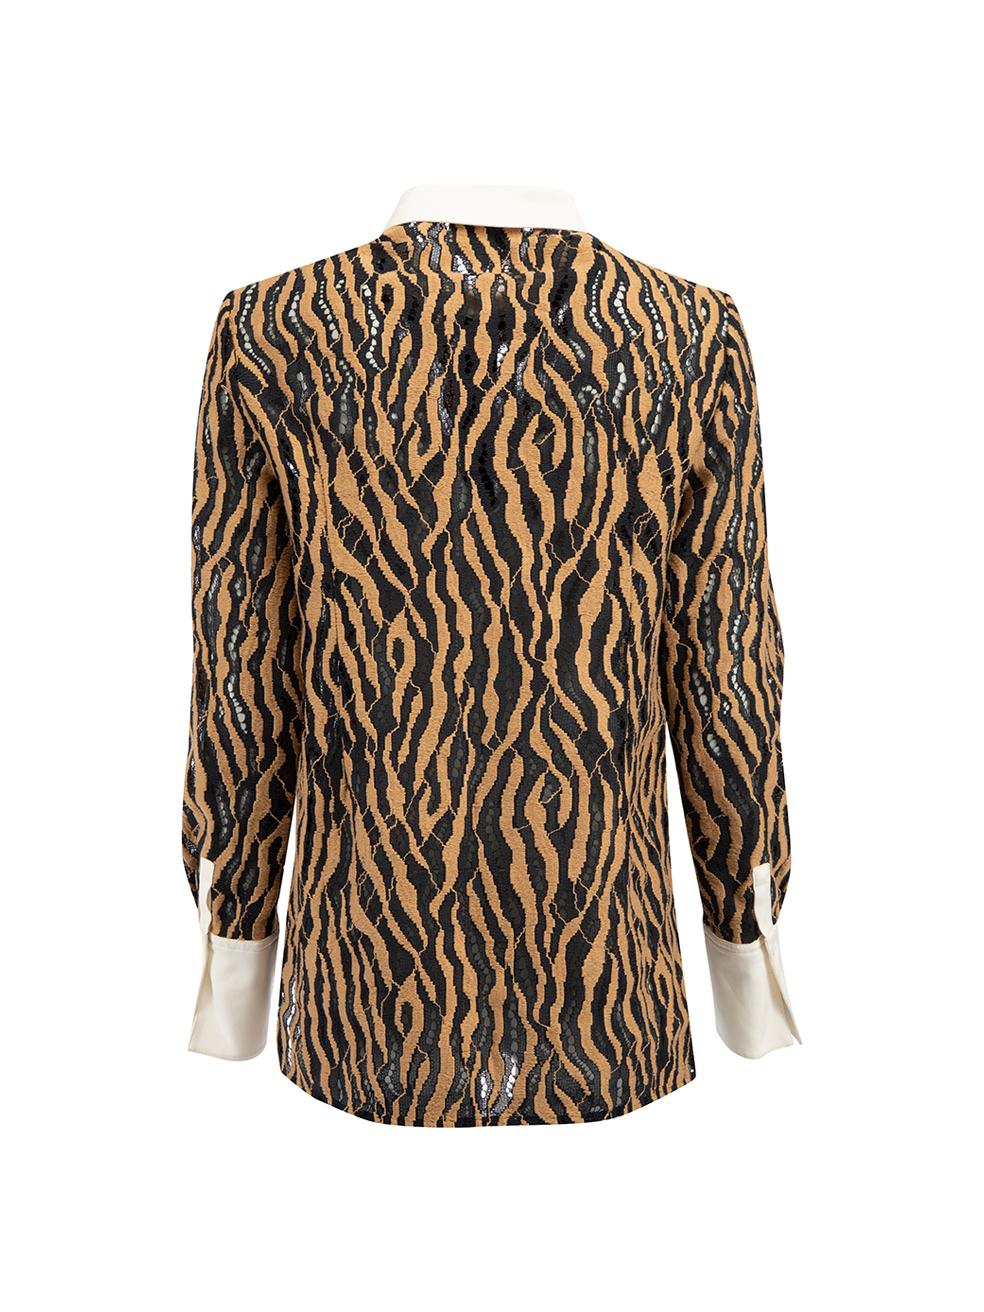 Pre-Loved 3.1 Phillip Lim Women's Tiger Patterned Long Sleeve Blouse In Excellent Condition In London, GB